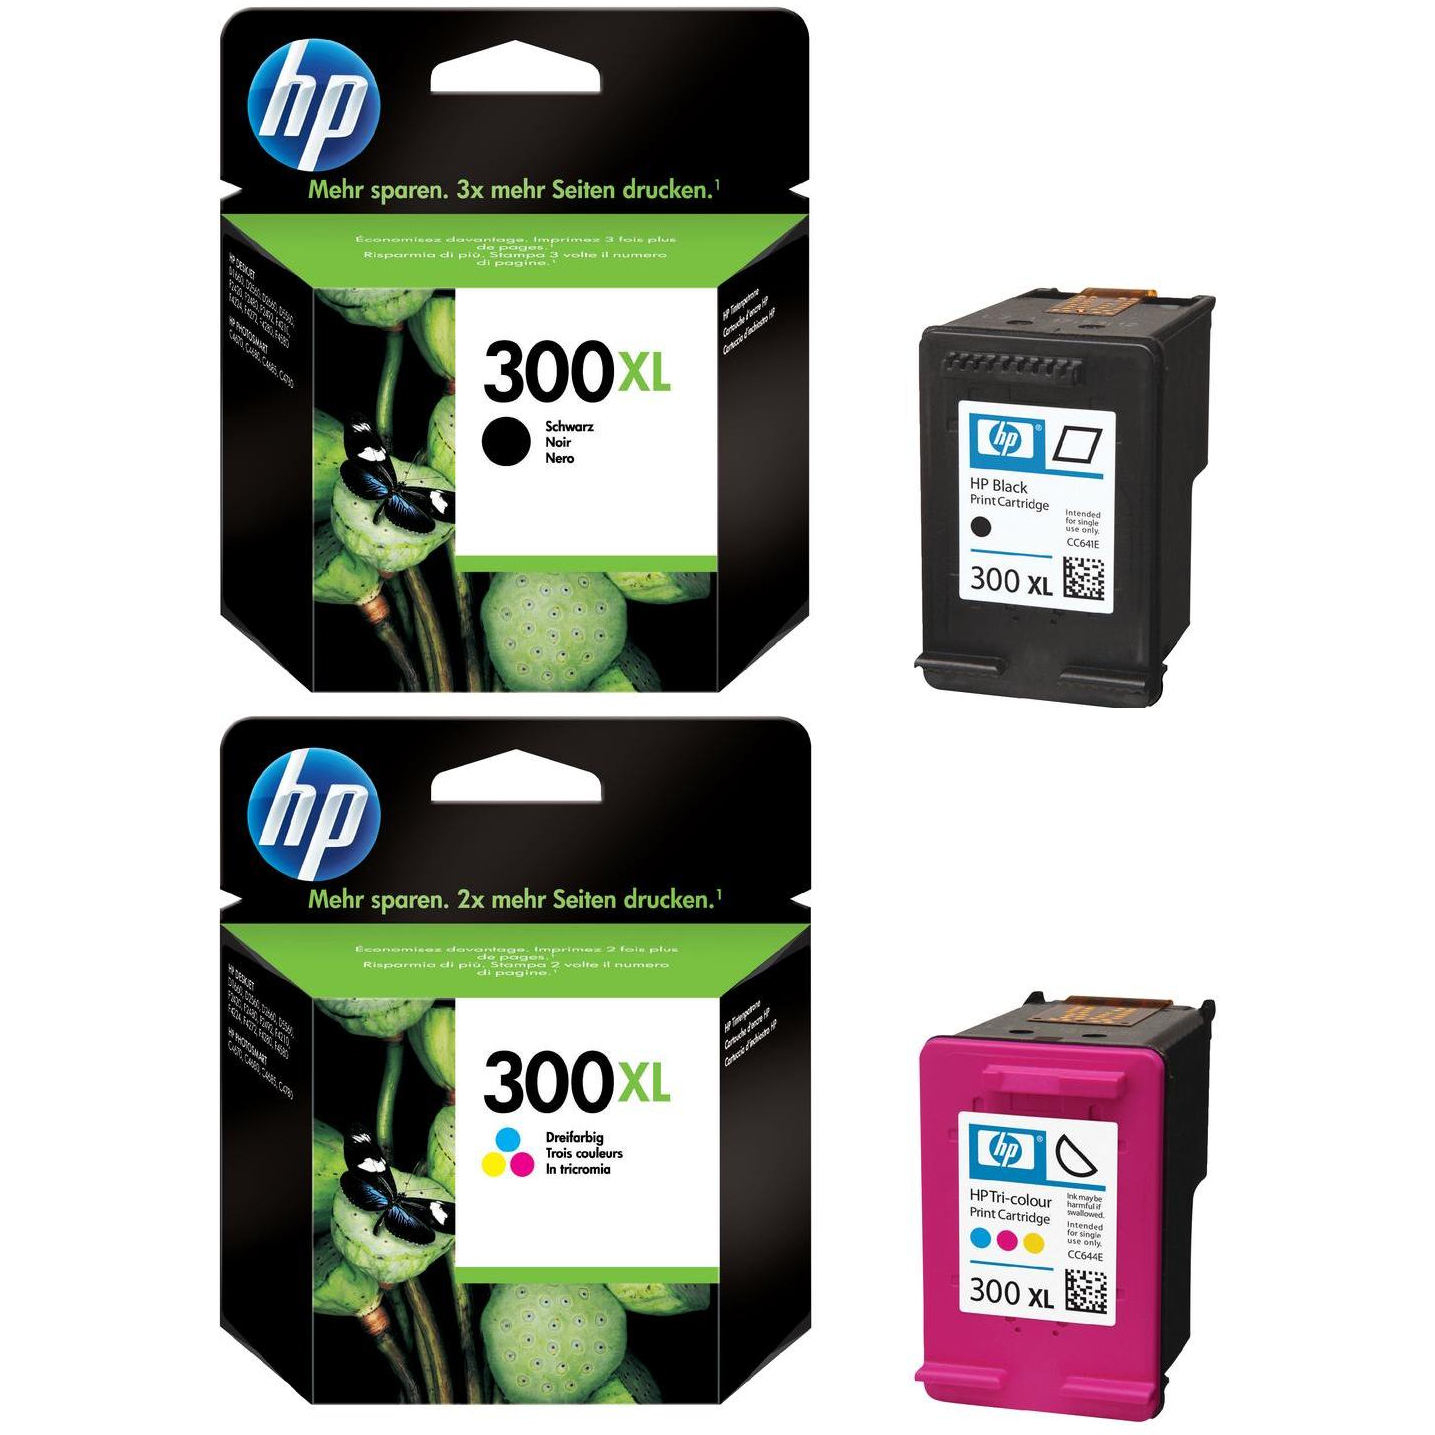 Related to HP F4280 Cartridges: HP-300XL-Pack